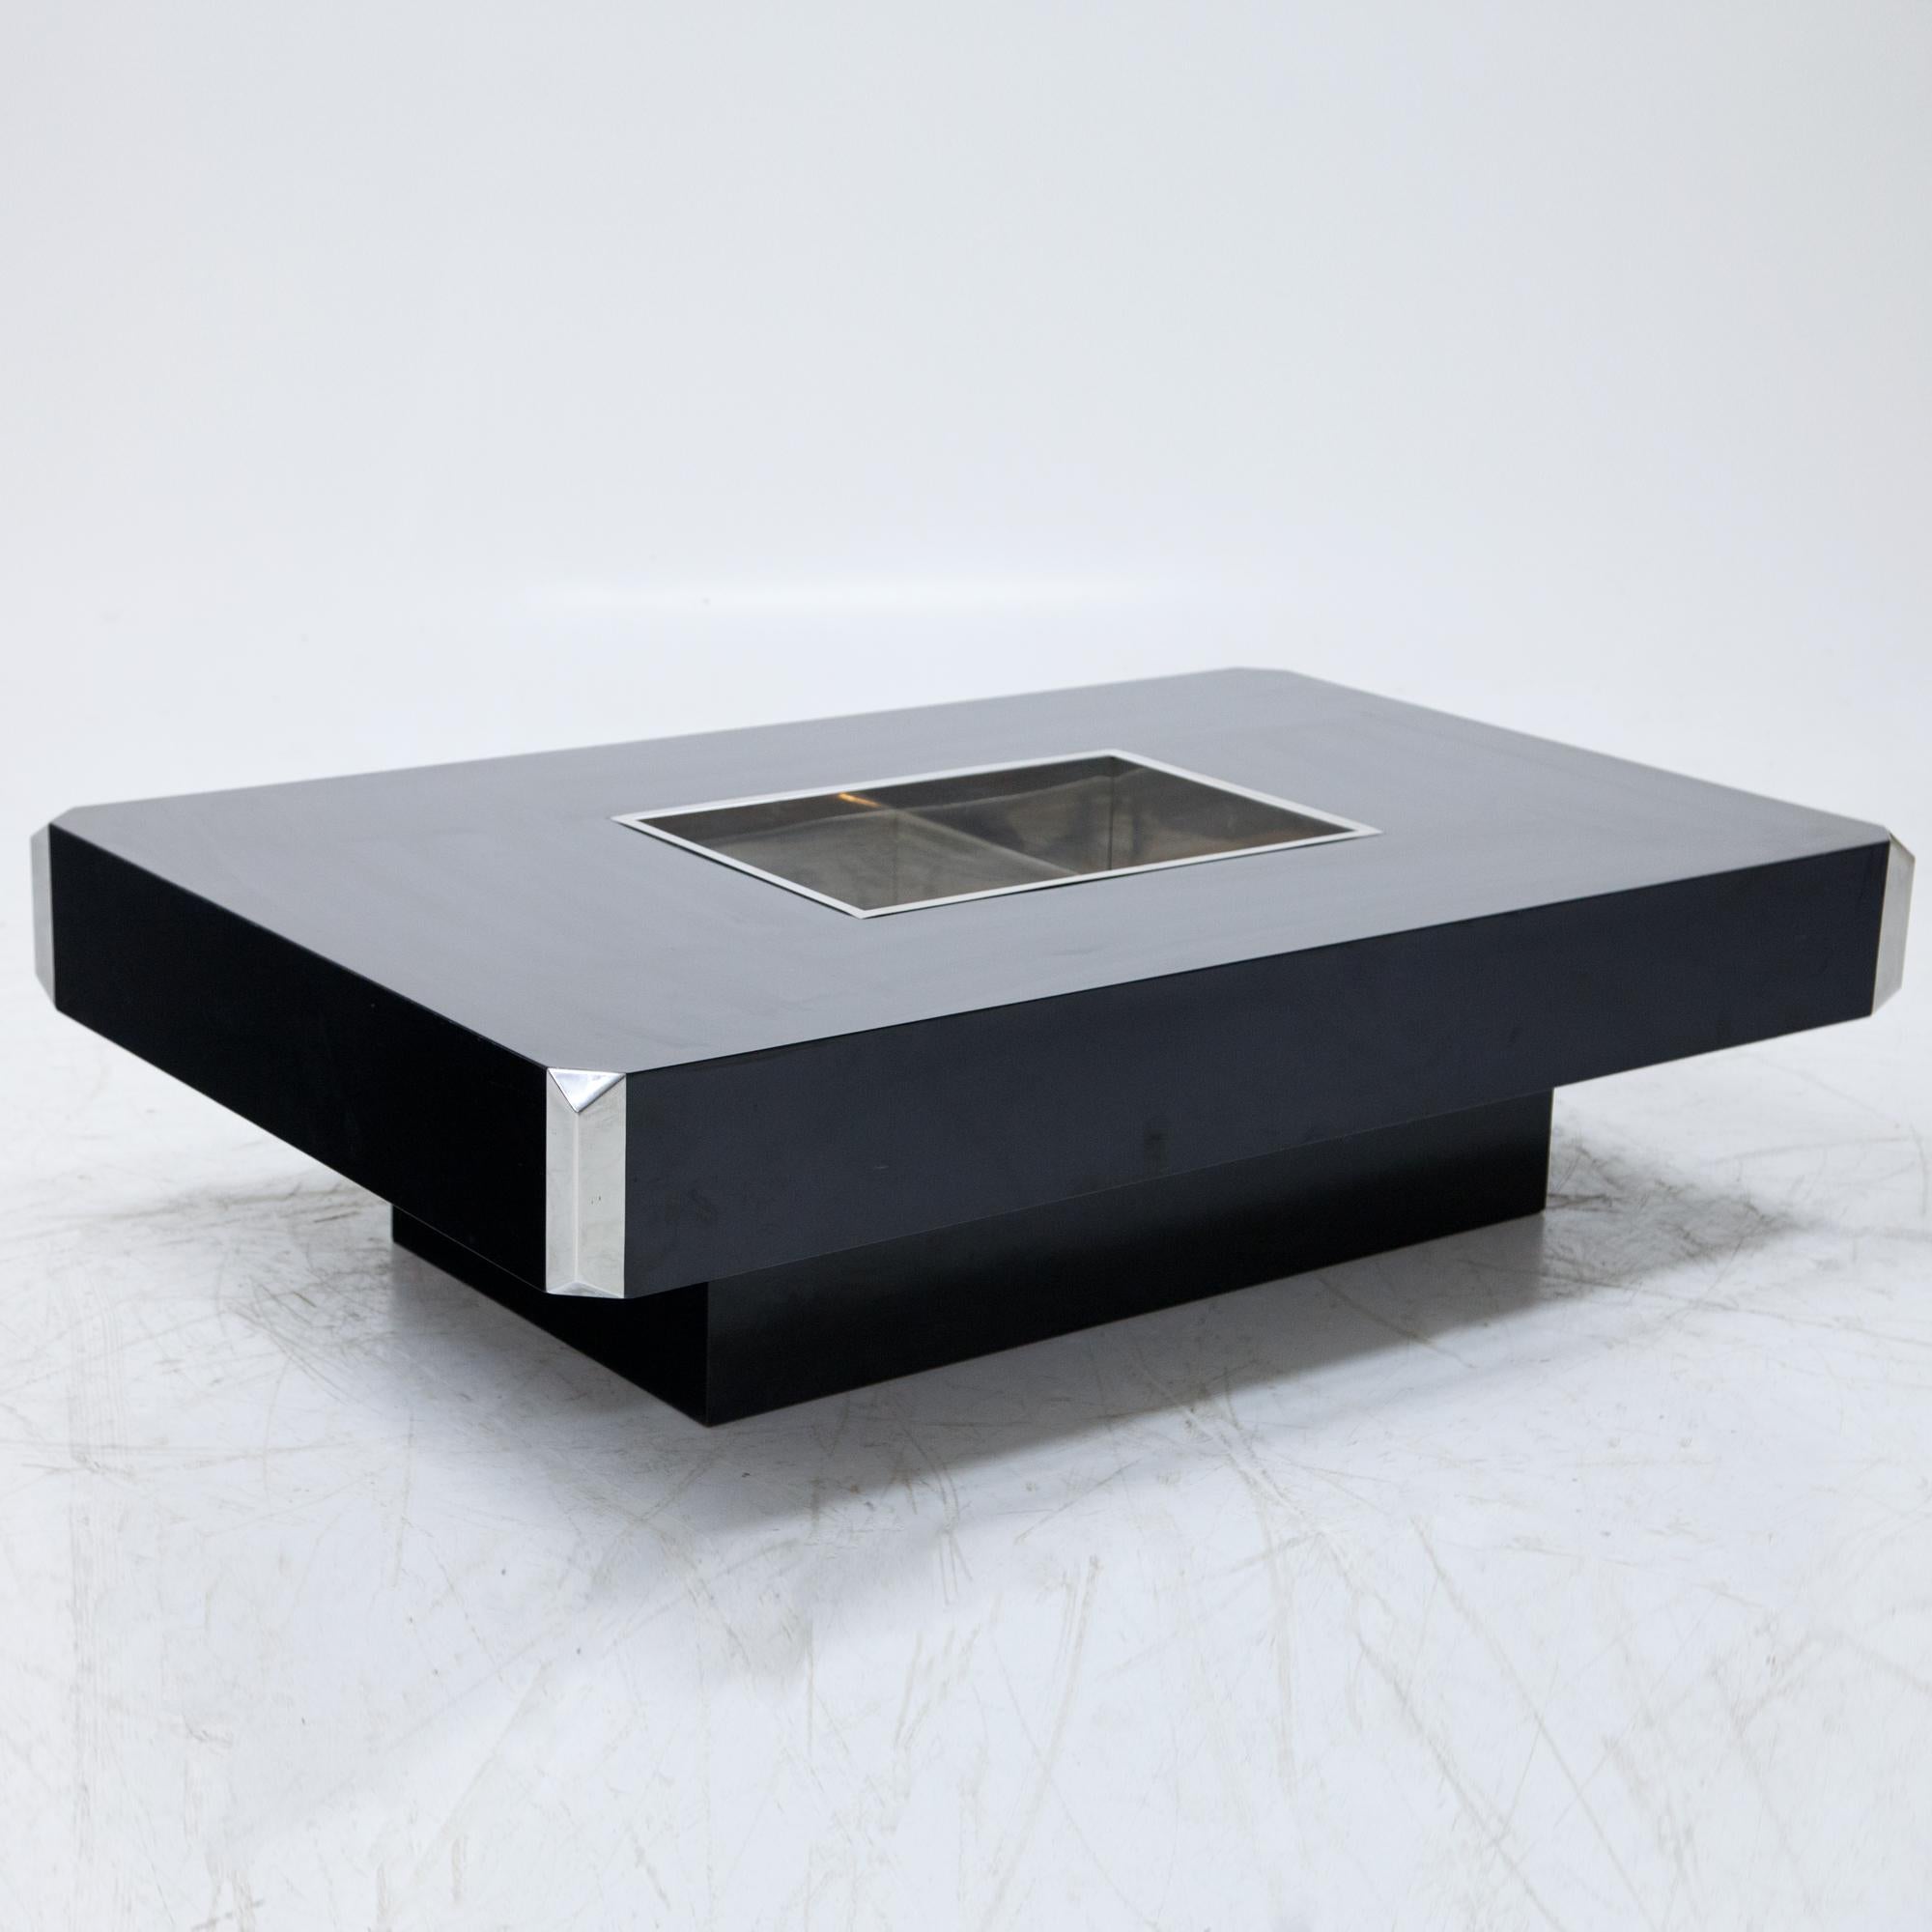 Black rectangular coffee table with stainless steel basin by Willy Rizzo. The corners of the dark table are accentuated in steel as well.